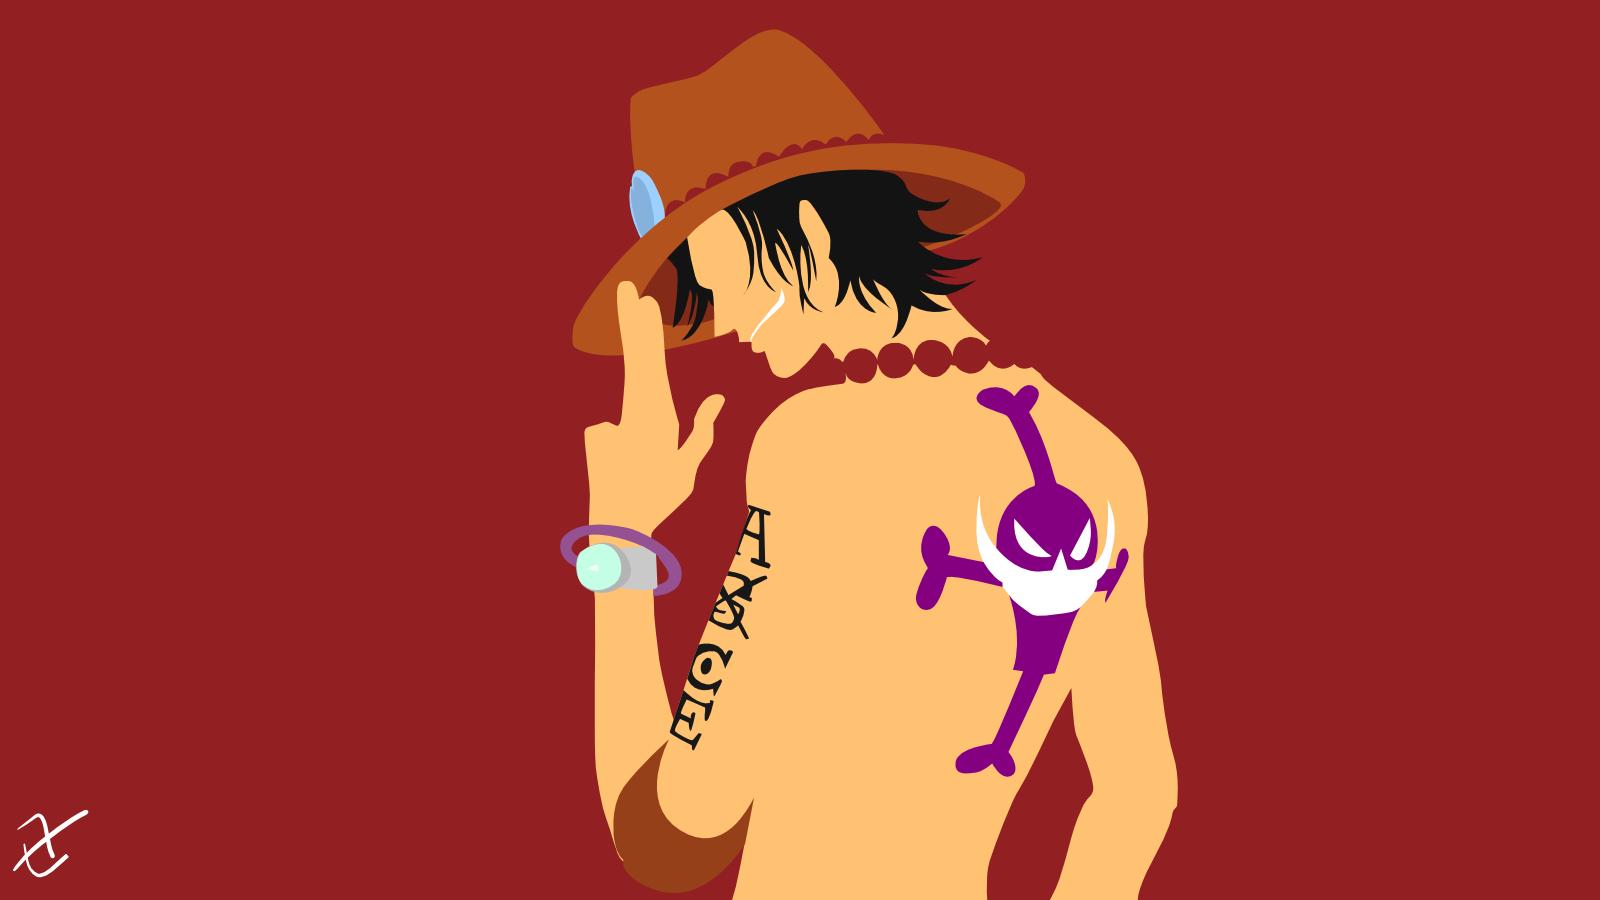 I couldn't find a minimalist Ace Wallpaper, so I made one